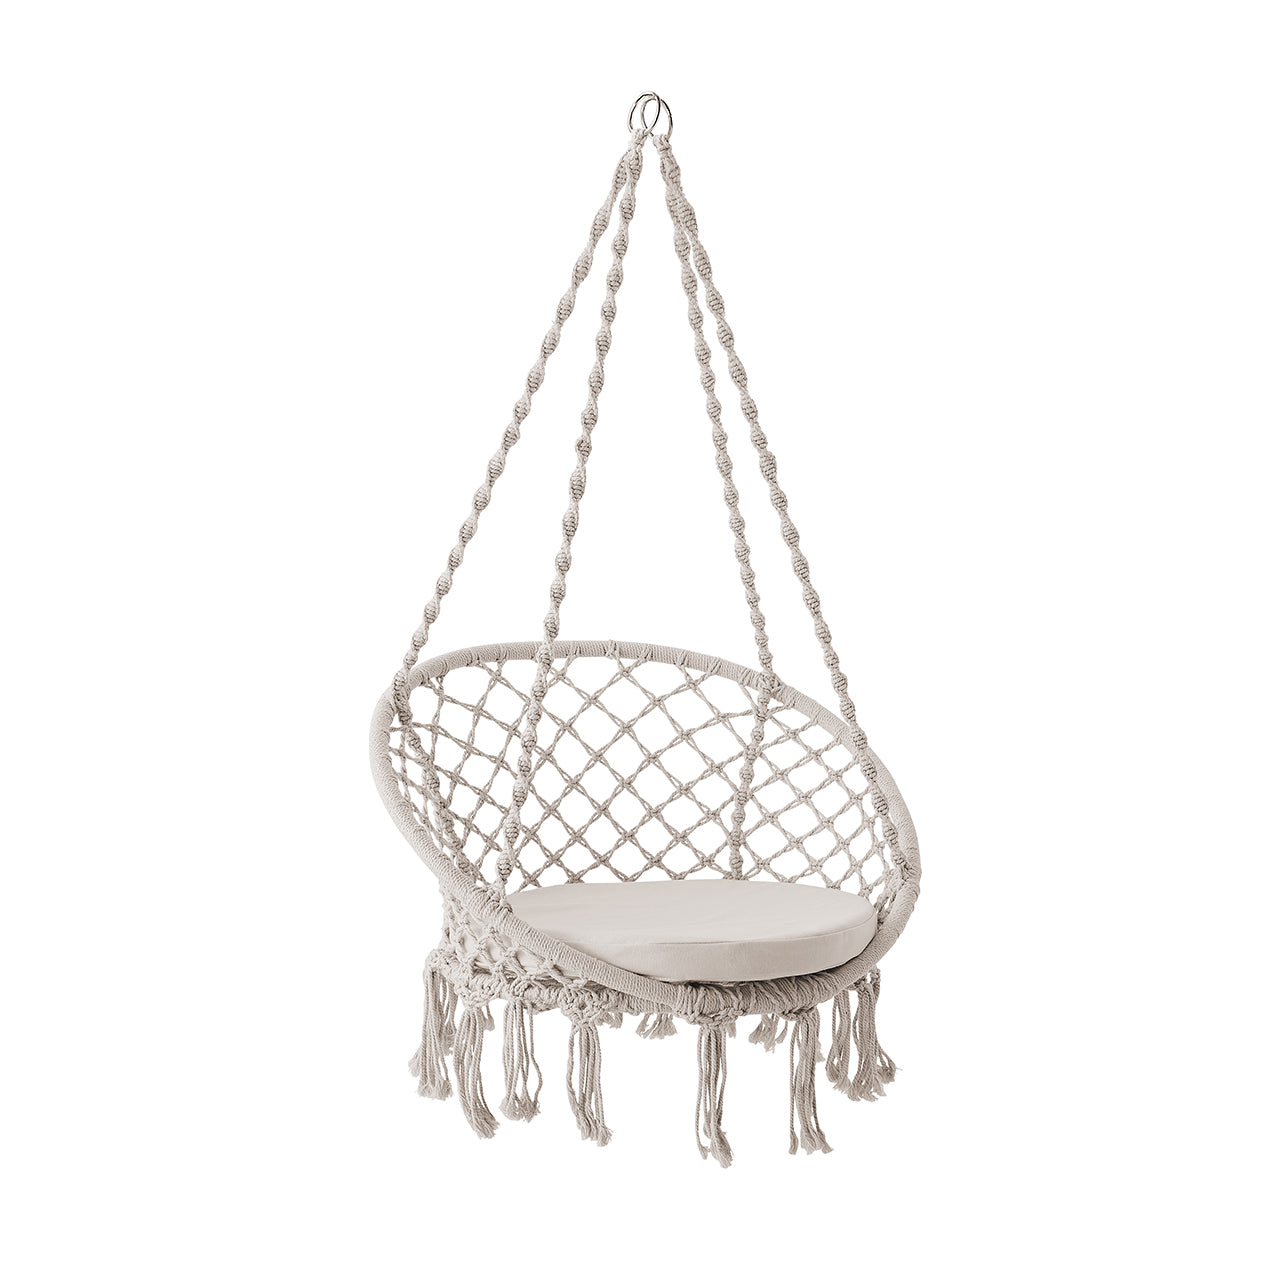 Bliss Hammocks 31.5-inch Wide Macramé Swing Chair with Fringe lining and Padded Cushion in the natural variation.